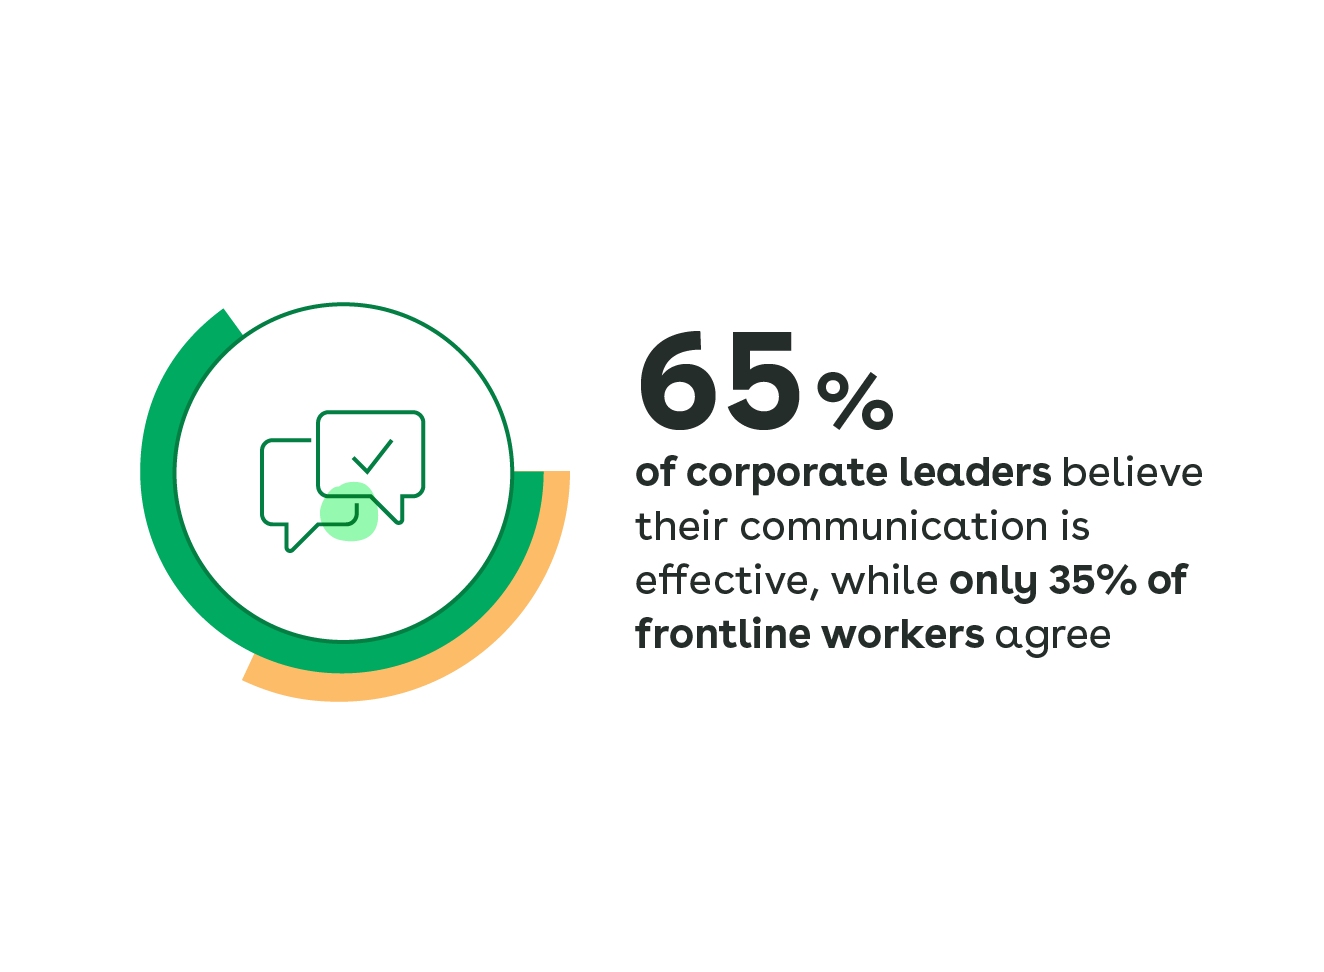 65% of corporate leaders believe their communication is effective, while only 35% of frontline workers agree